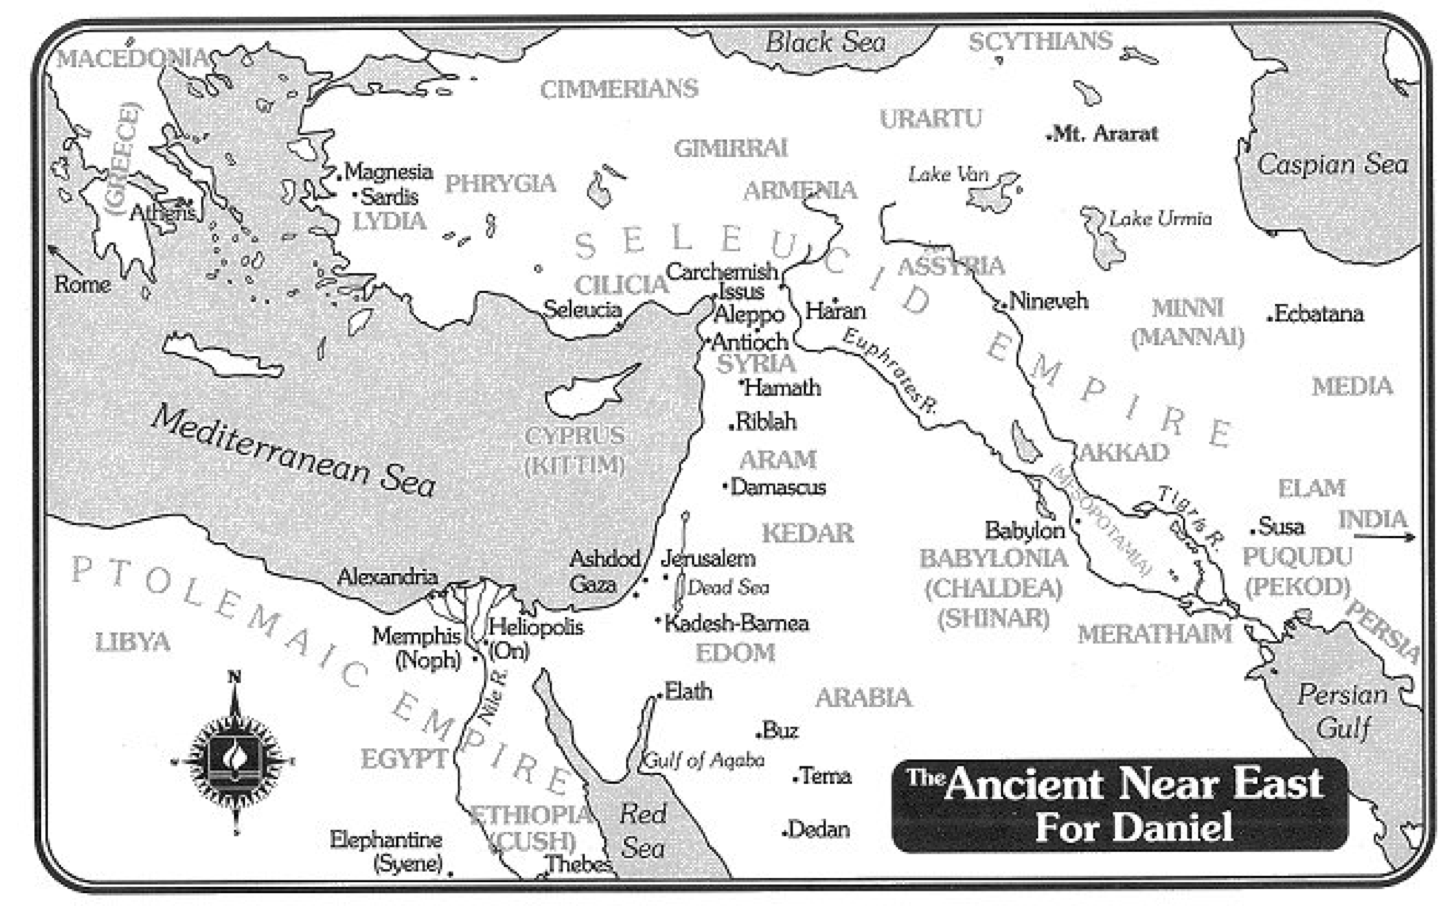 Map for Book of Daniel